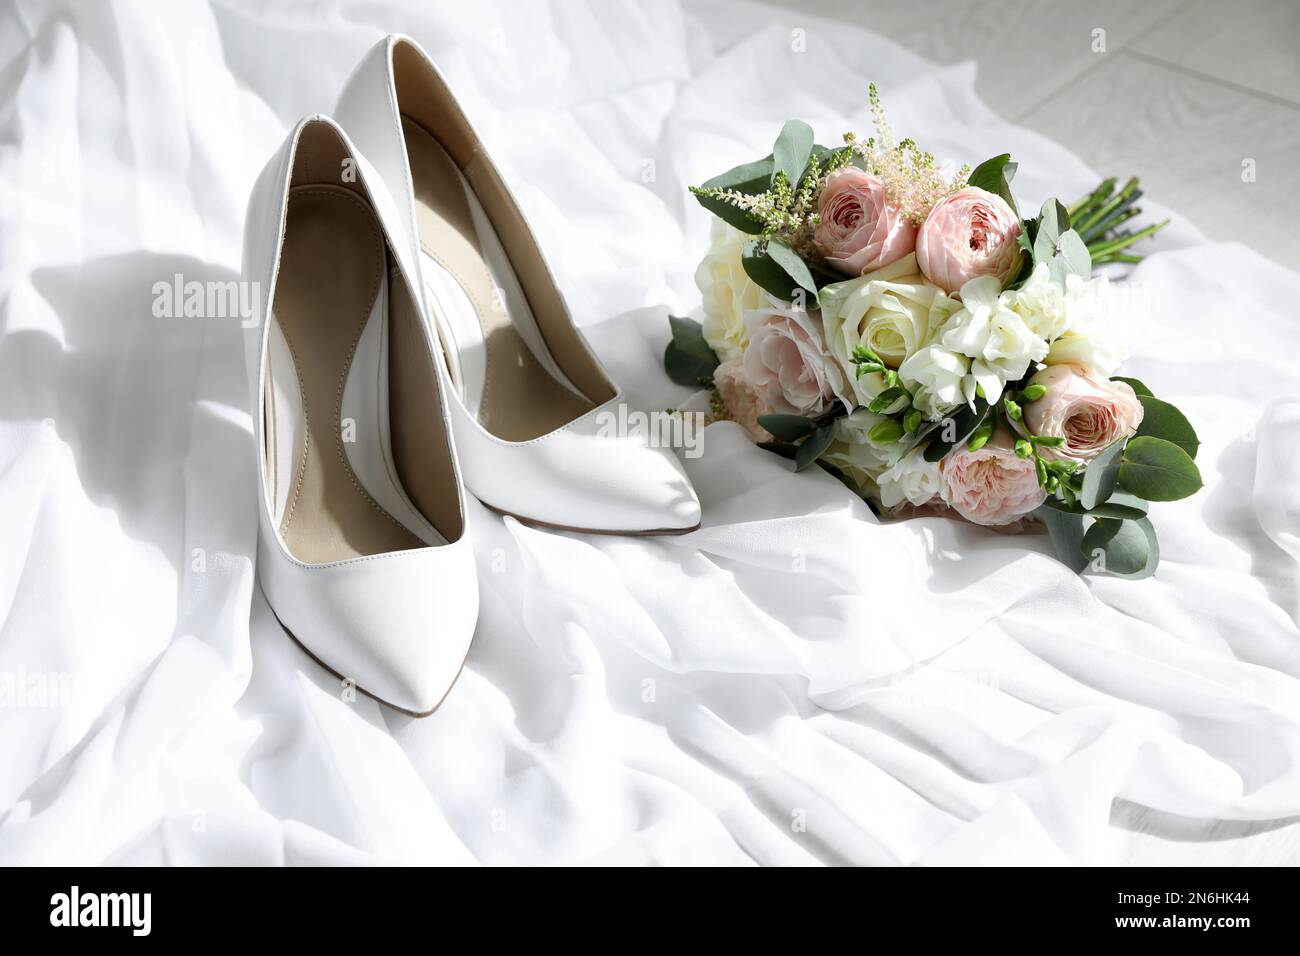 Pair of wedding high heel shoes and beautiful bouquet on white fabric Stock Photo